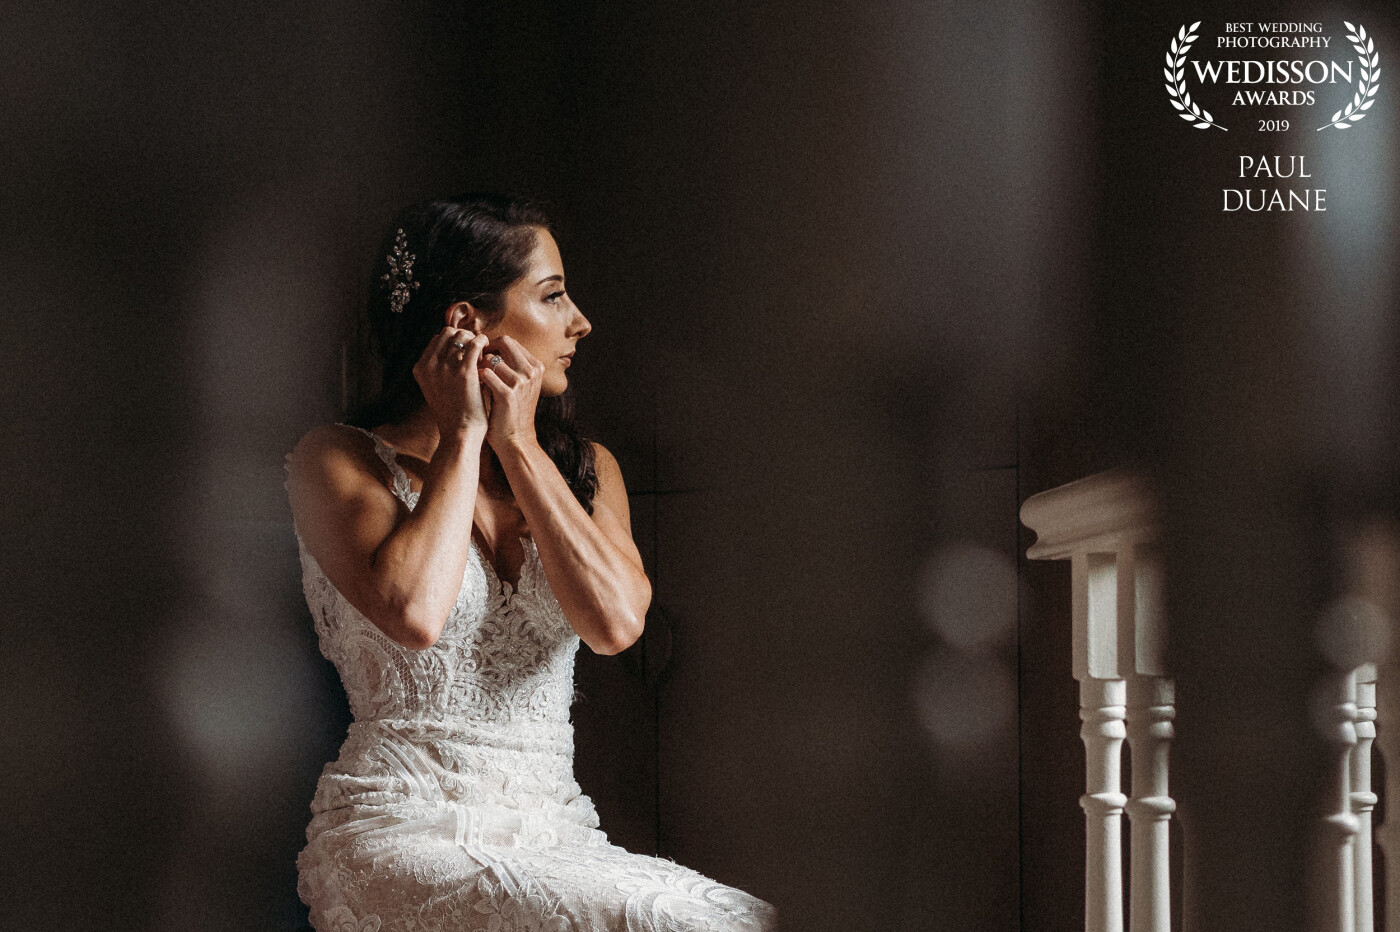 Our beautiful Bride Kaitlyn adding the finishing touches on her wedding morning. This documentary shot was captured at Dromoland Castle, Ireland. Kaitlyn and her Husband Barry came all the way from Connecticut, the USA to marry in the 5 star 16th Century Castle. A truly magical day was spent in a magical place